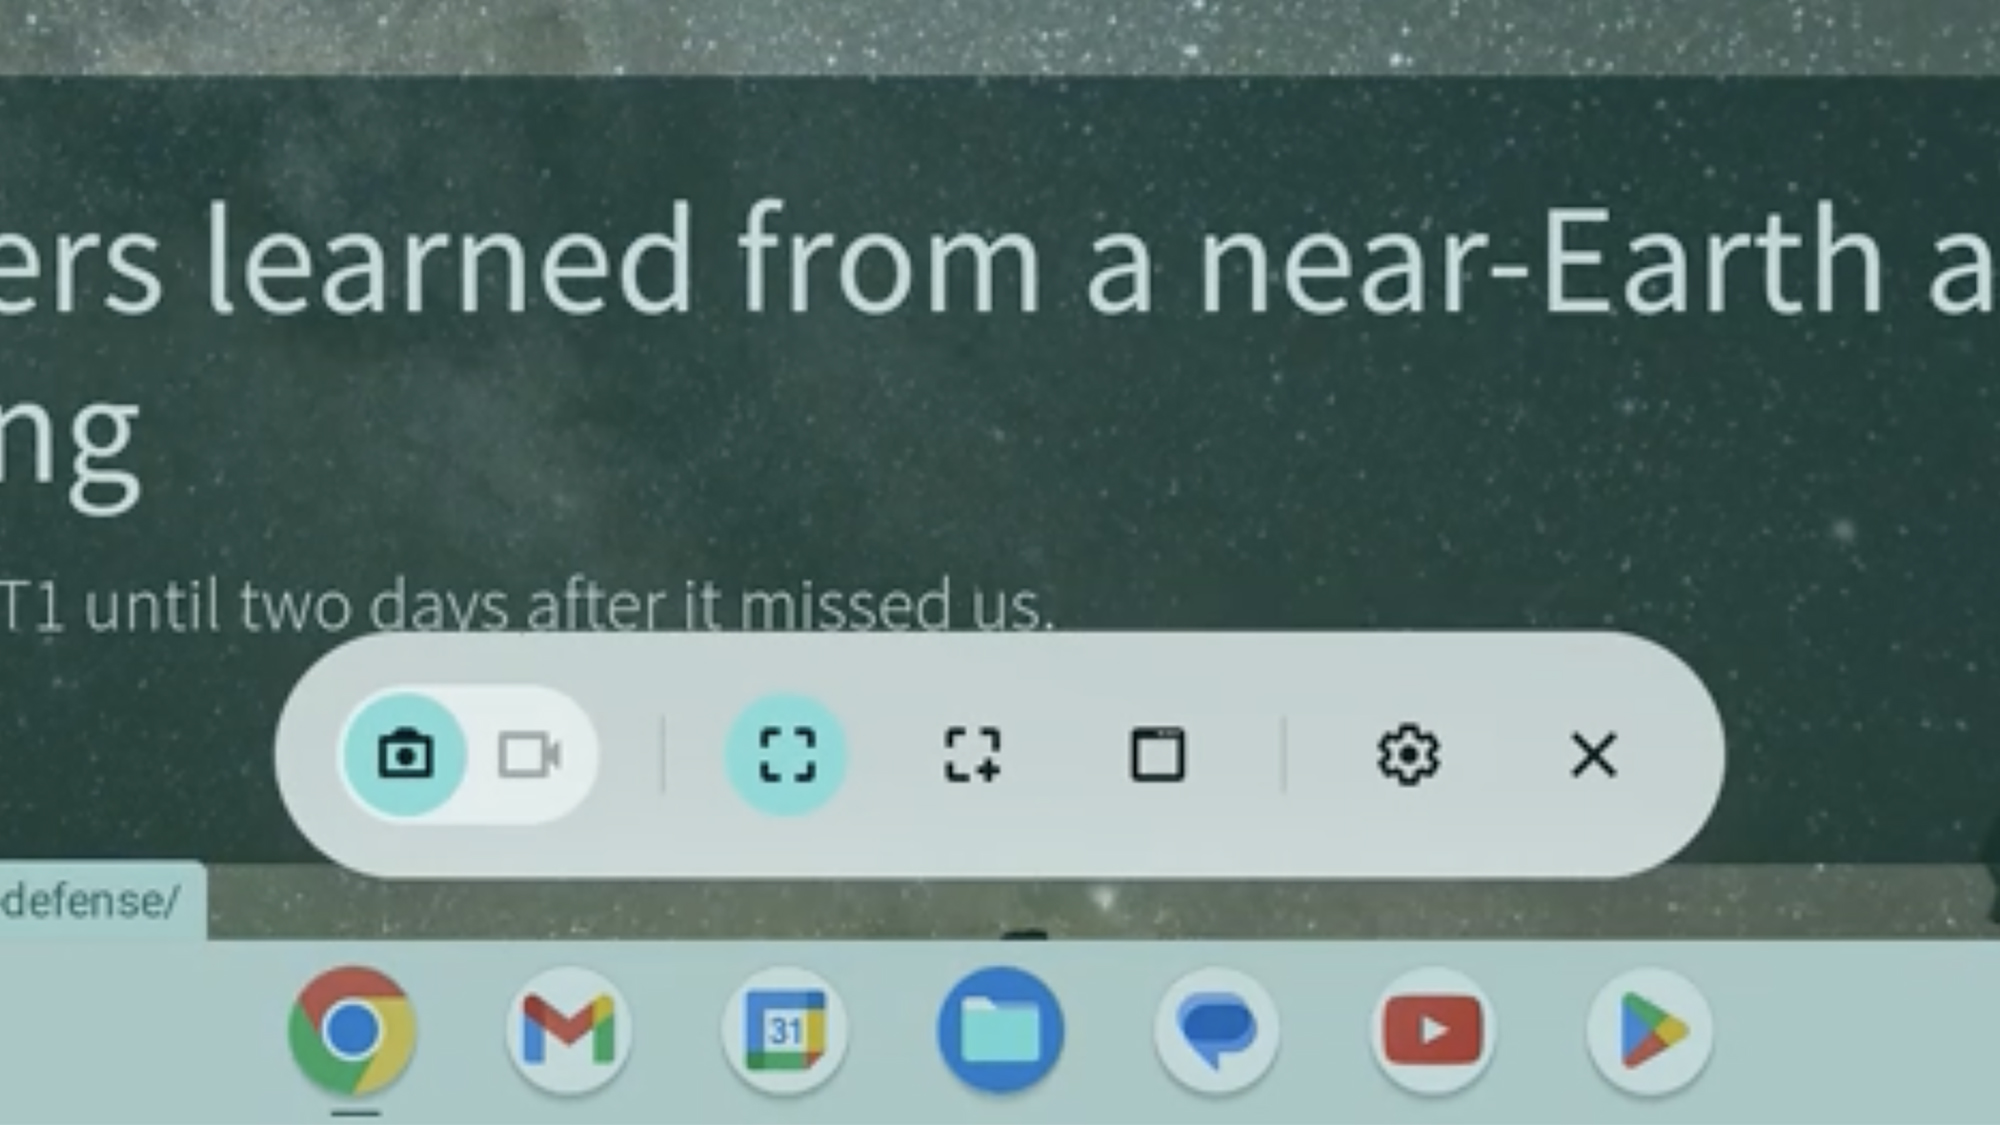 ChromeOS's Screenshot toolbar showing the different options to capture screen grabs and recordings.